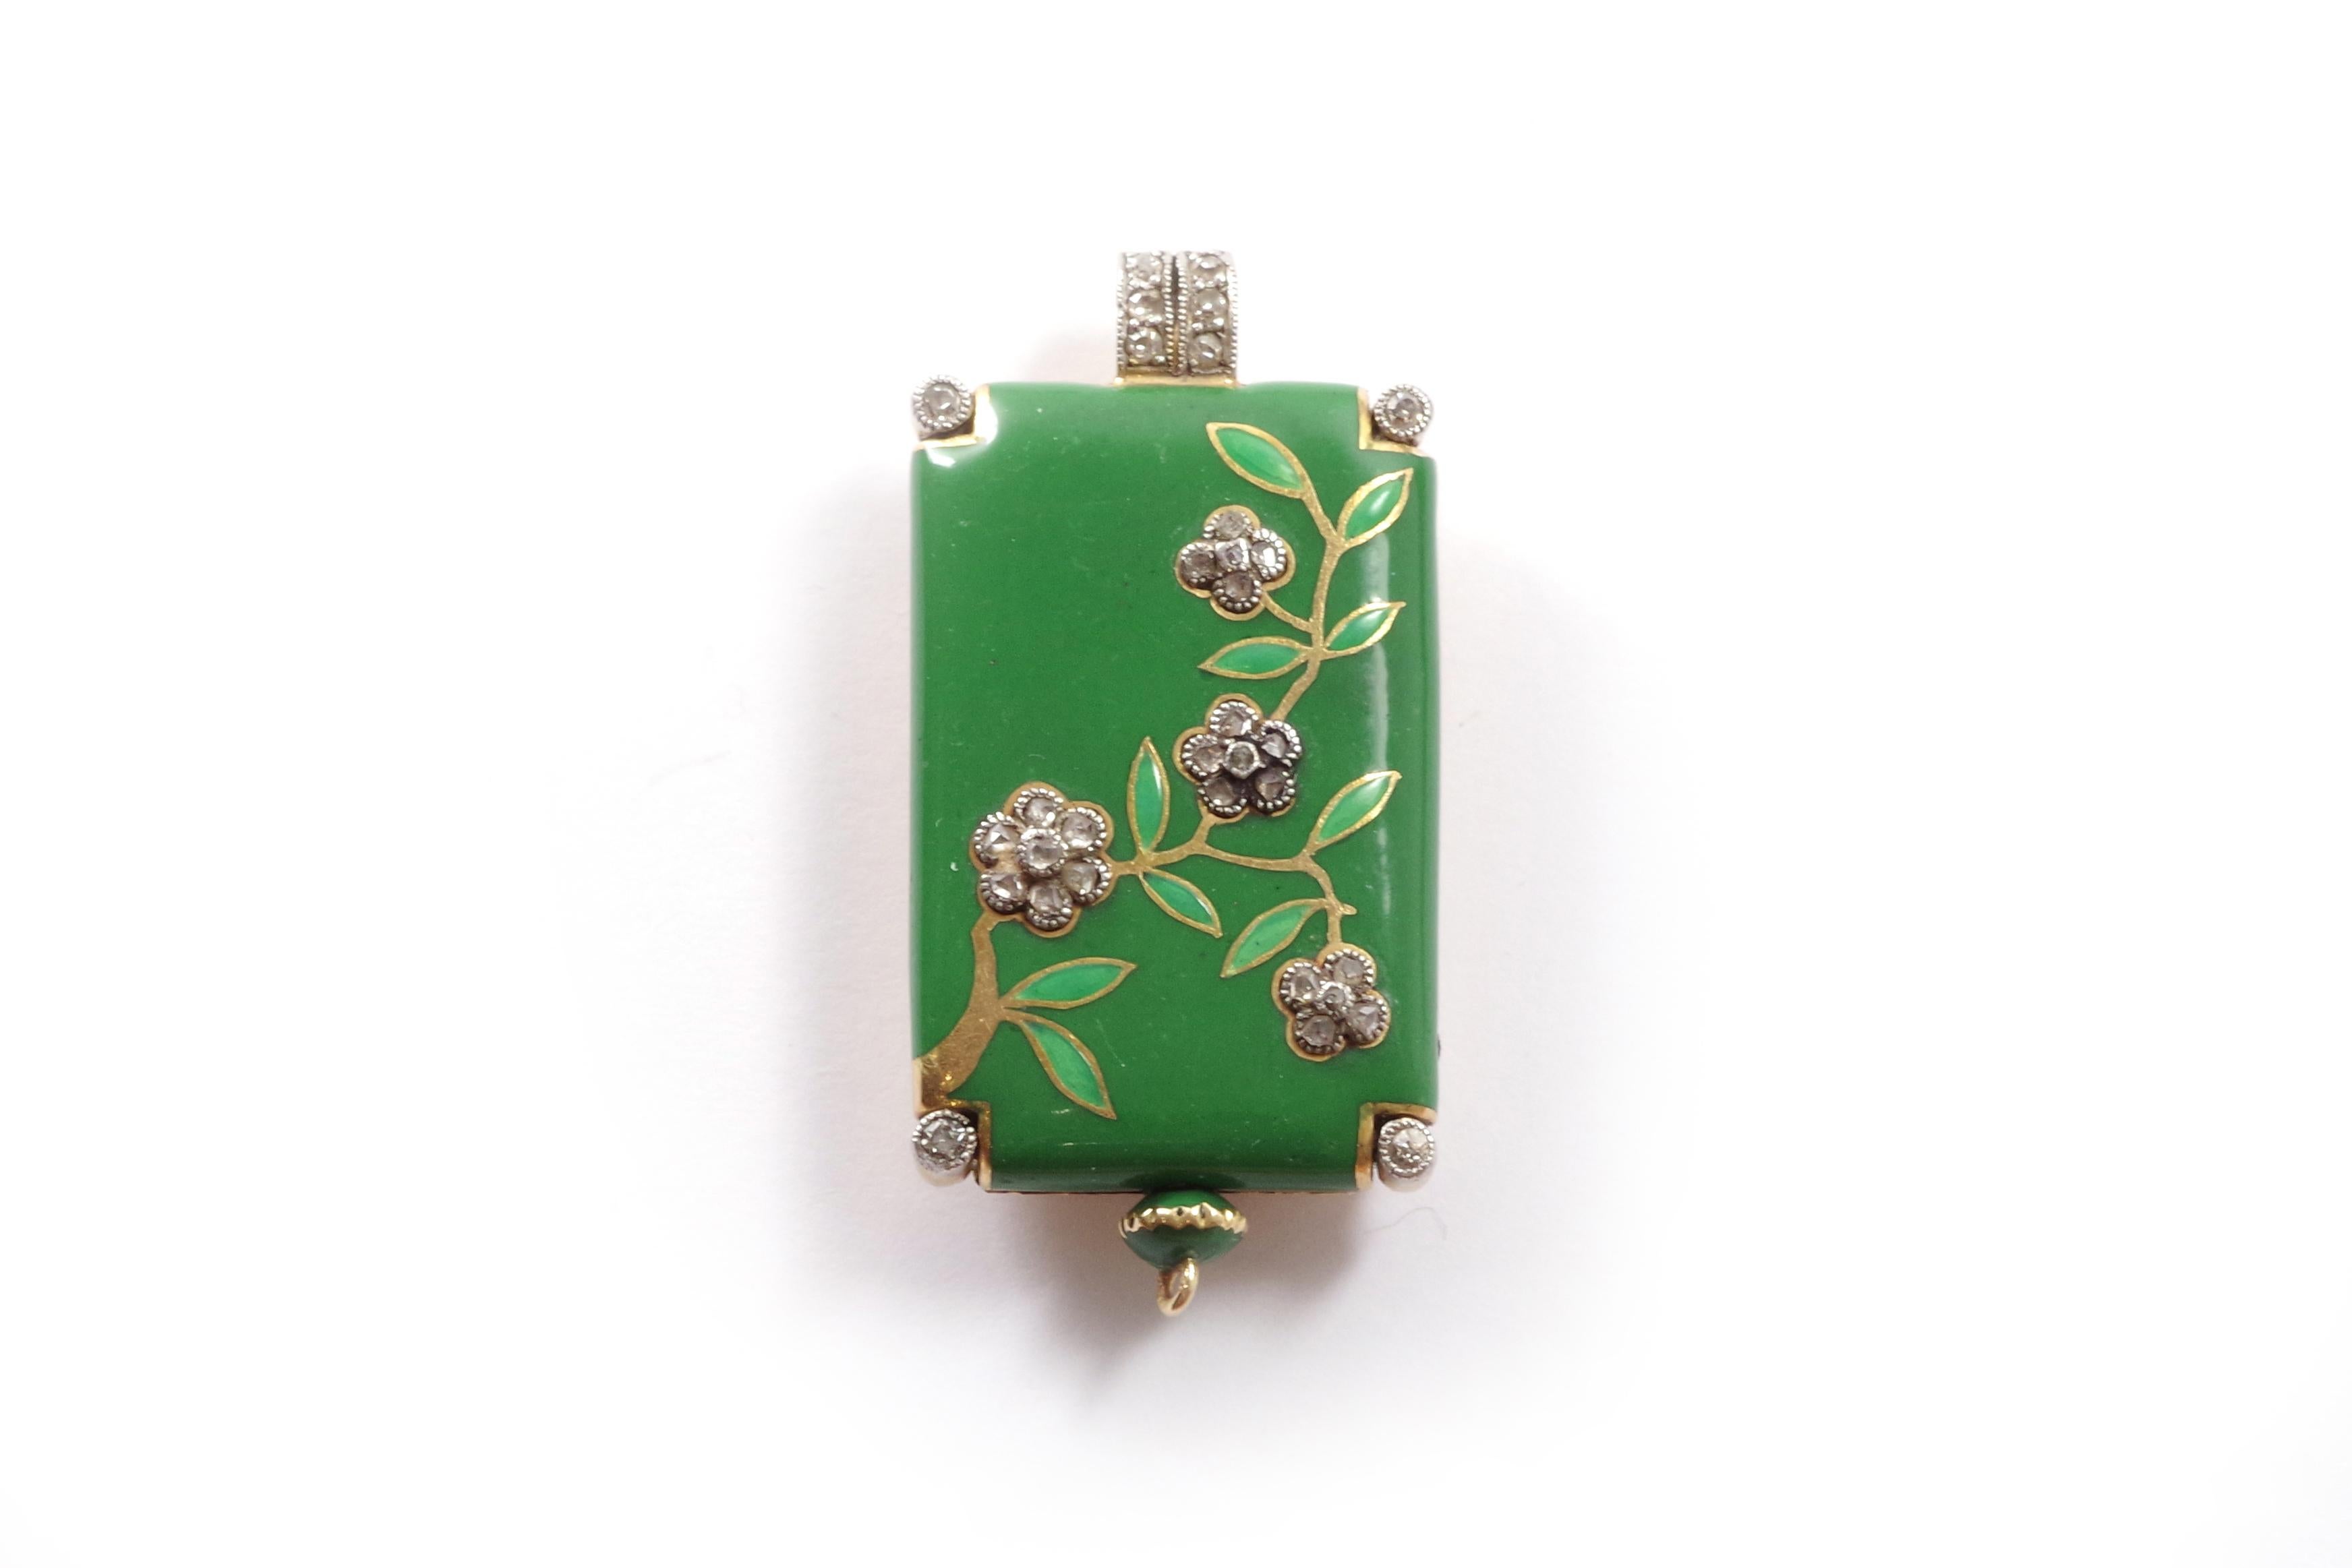 Art Deco enamel pendant watch in 18 karat yellow gold and platinum. A rare rectangular-shaped pendant watch, enameled on one side in green color and adorned with a blossoming branch motif influenced by Japanese Arts. The four flowers are represented